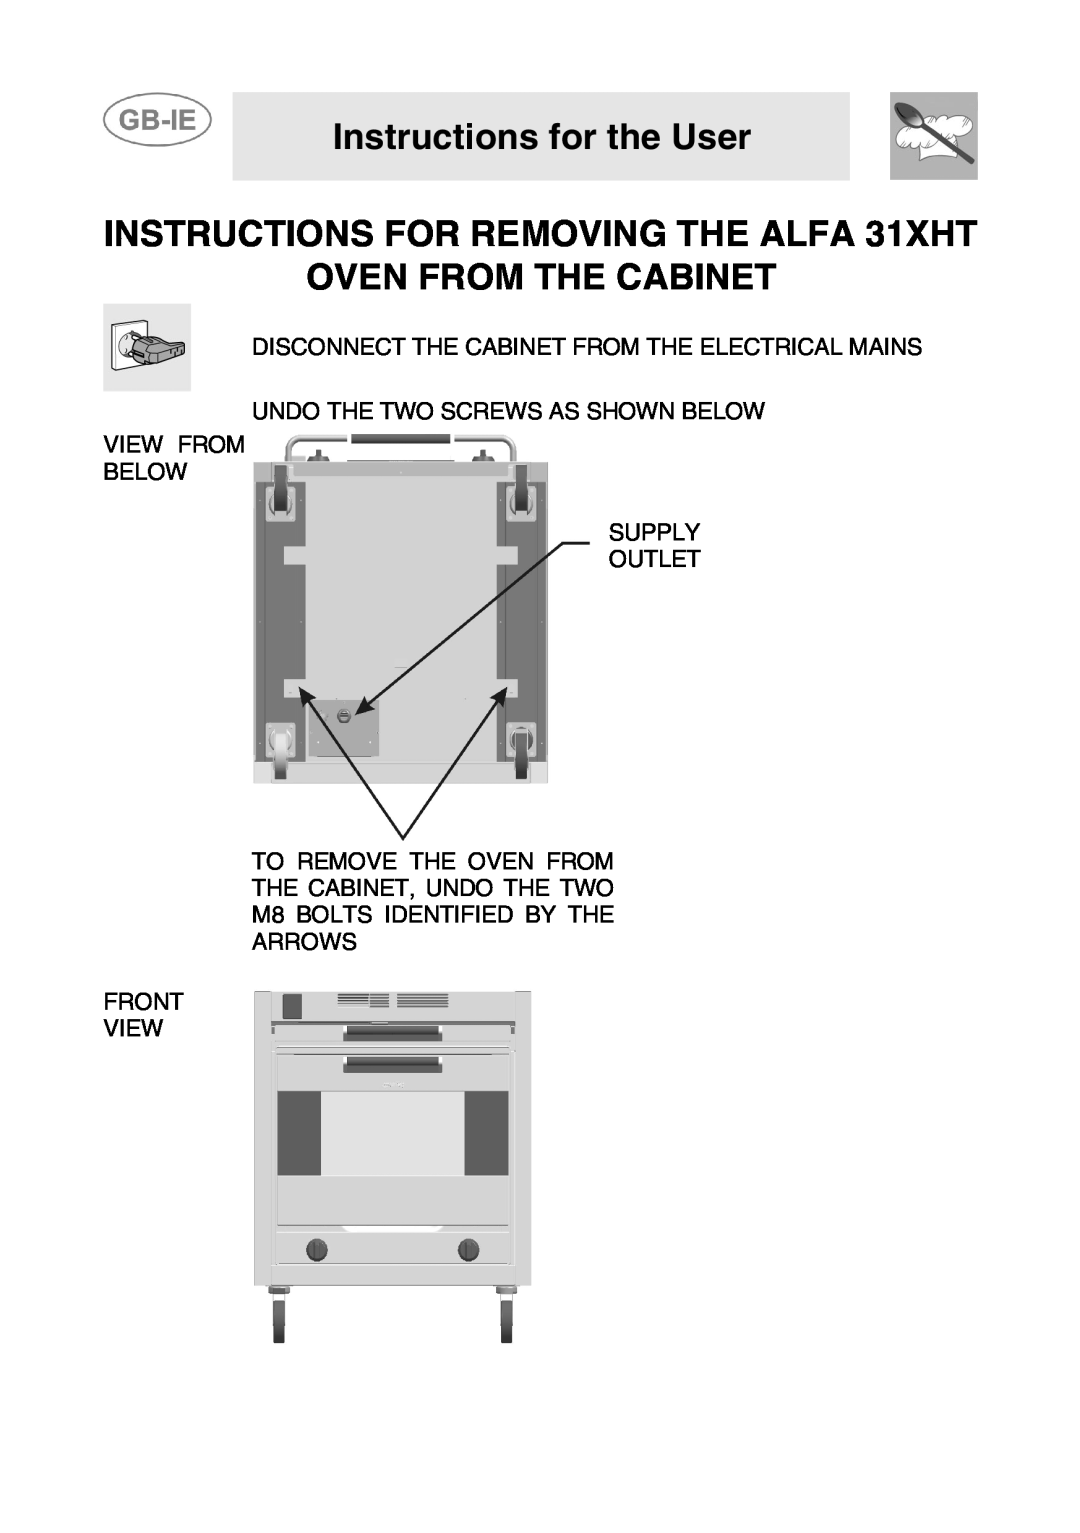 Smeg instruction manual Instructions for the User, INSTRUCTIONS FOR REMOVING THE ALFA 31XHT OVEN FROM THE CABINET 